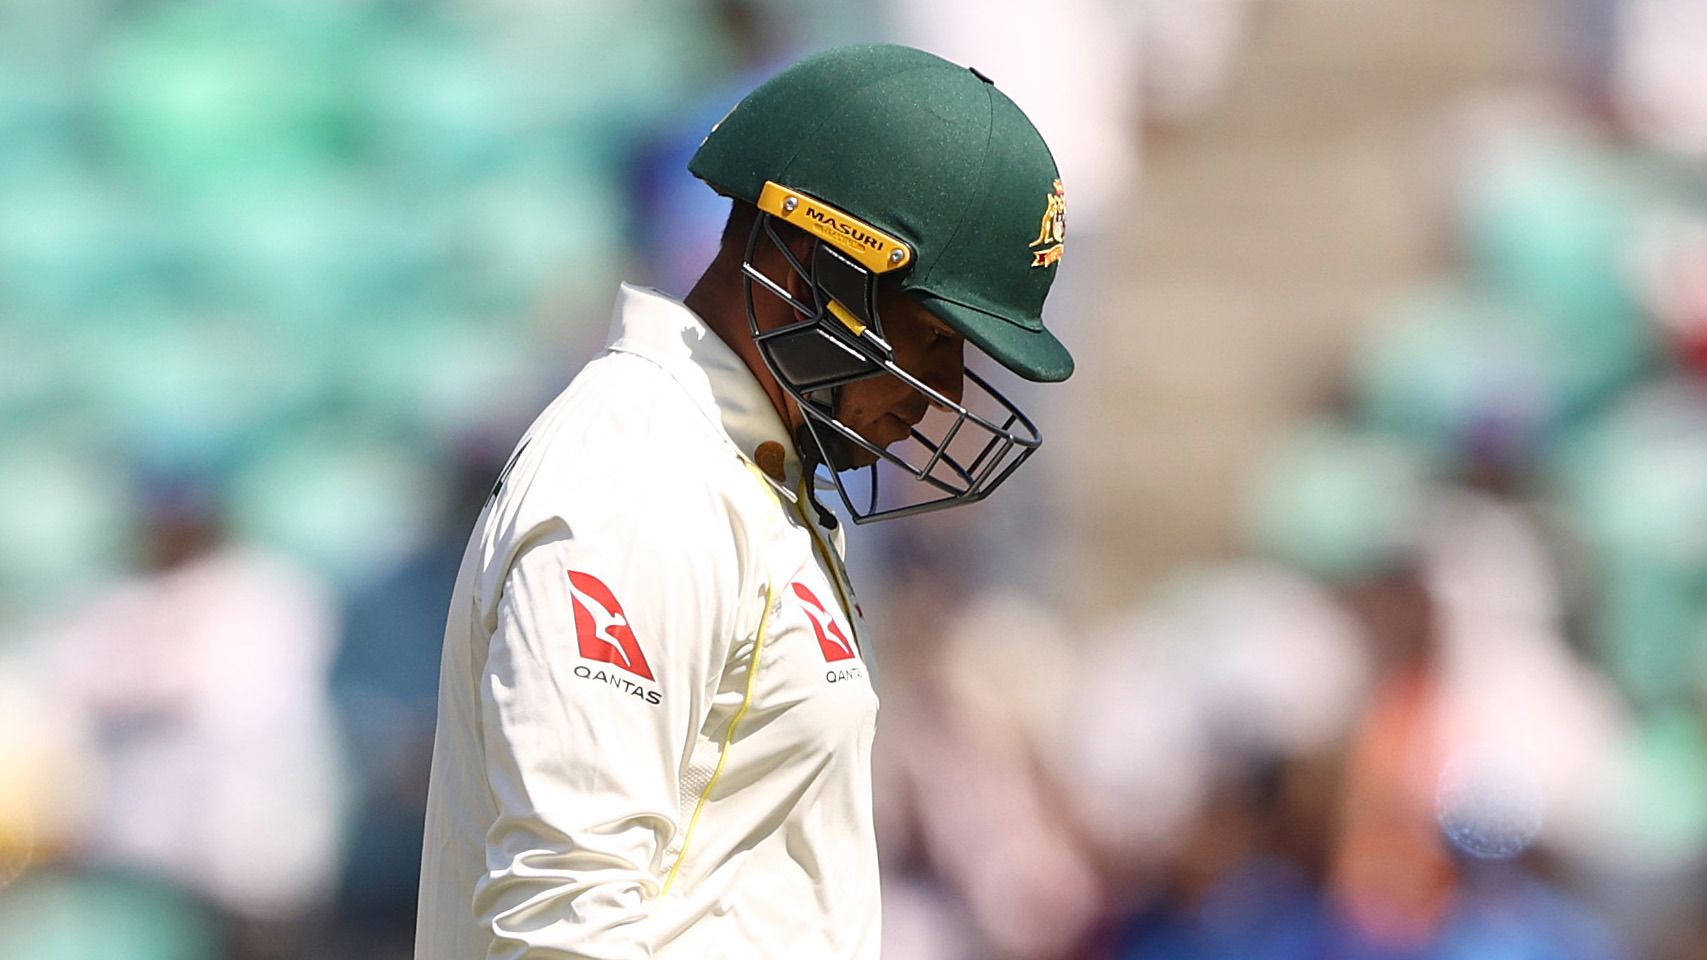 Usman Khawaja of Australia walks off after he was dismissed by Ravichandran Ashwin of India during day three of the First Test match in the series between India and Australia at Vidarbha Cricket Association Ground on February 11, 2023 in Nagpur, India. (Photo by Robert Cianflone/Getty Images)